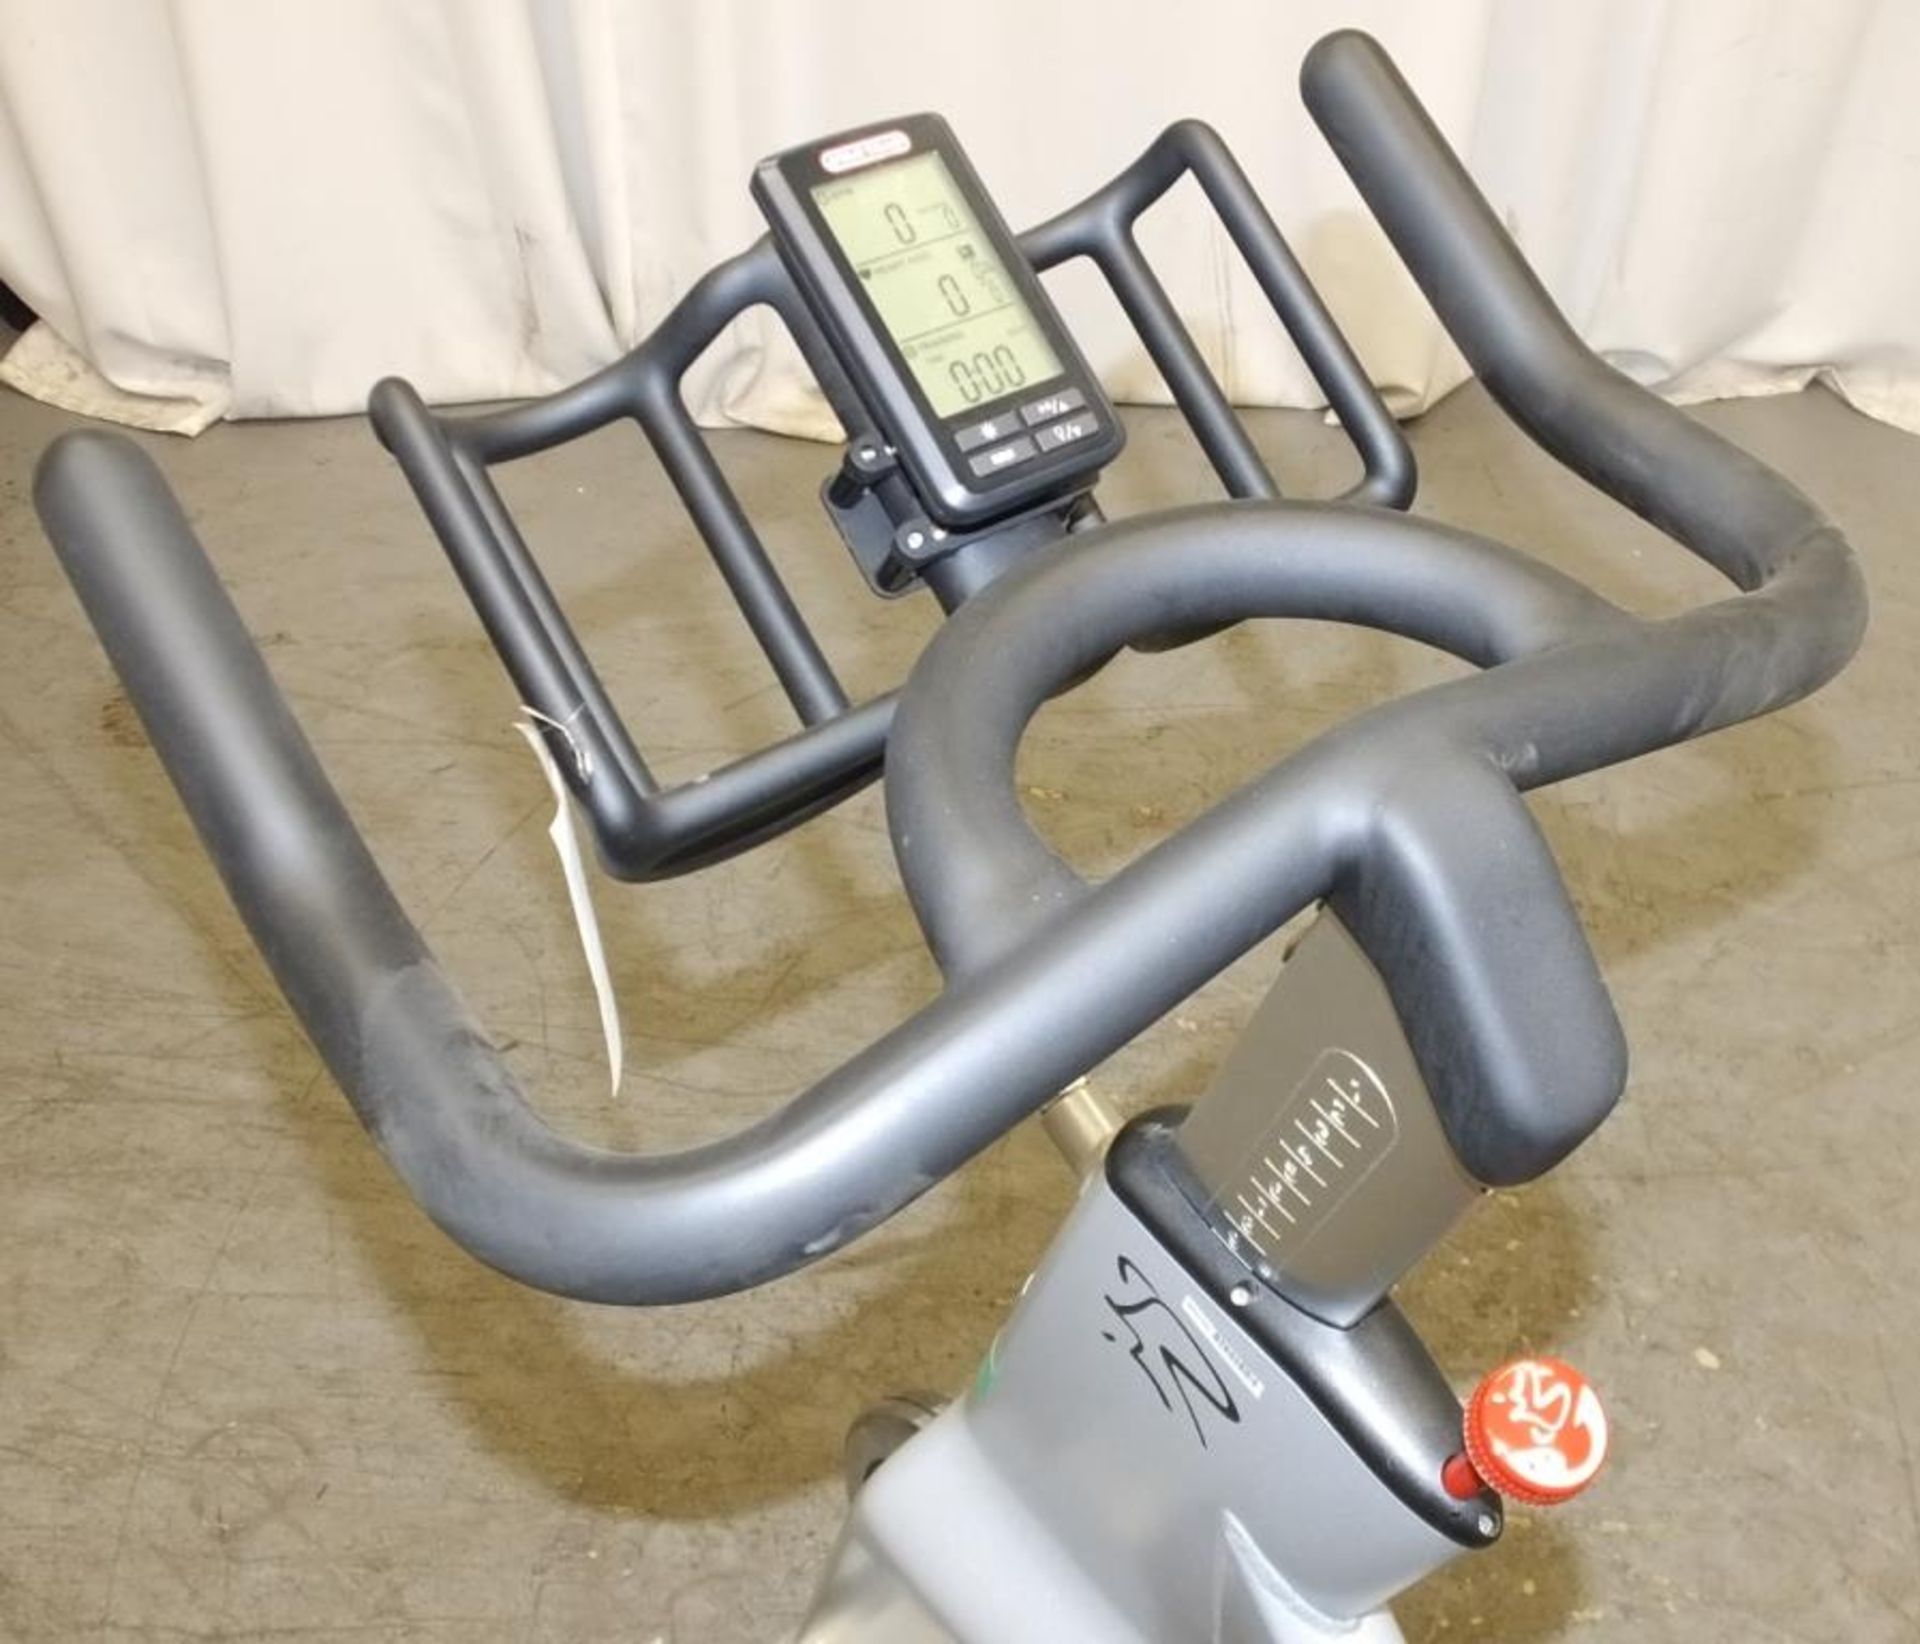 Startrac Spinner NXT Spin Bike - missing pedal - console powers up - functionality untested - Image 5 of 6